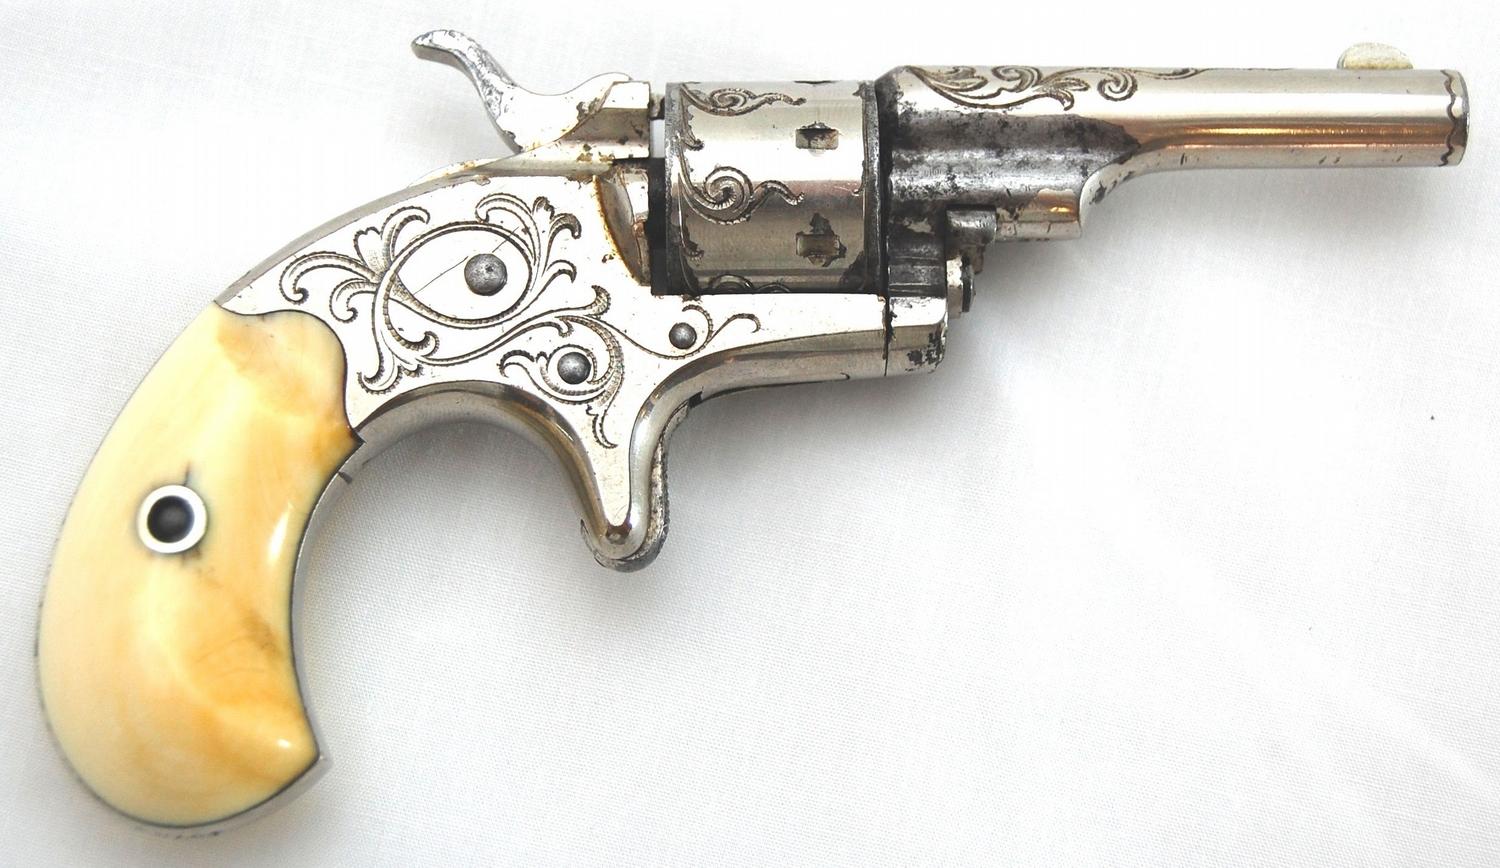 Colt Old Line open-top 7 shot revolver in 22 caliber, Factory Engraved w/ Ivory Grips